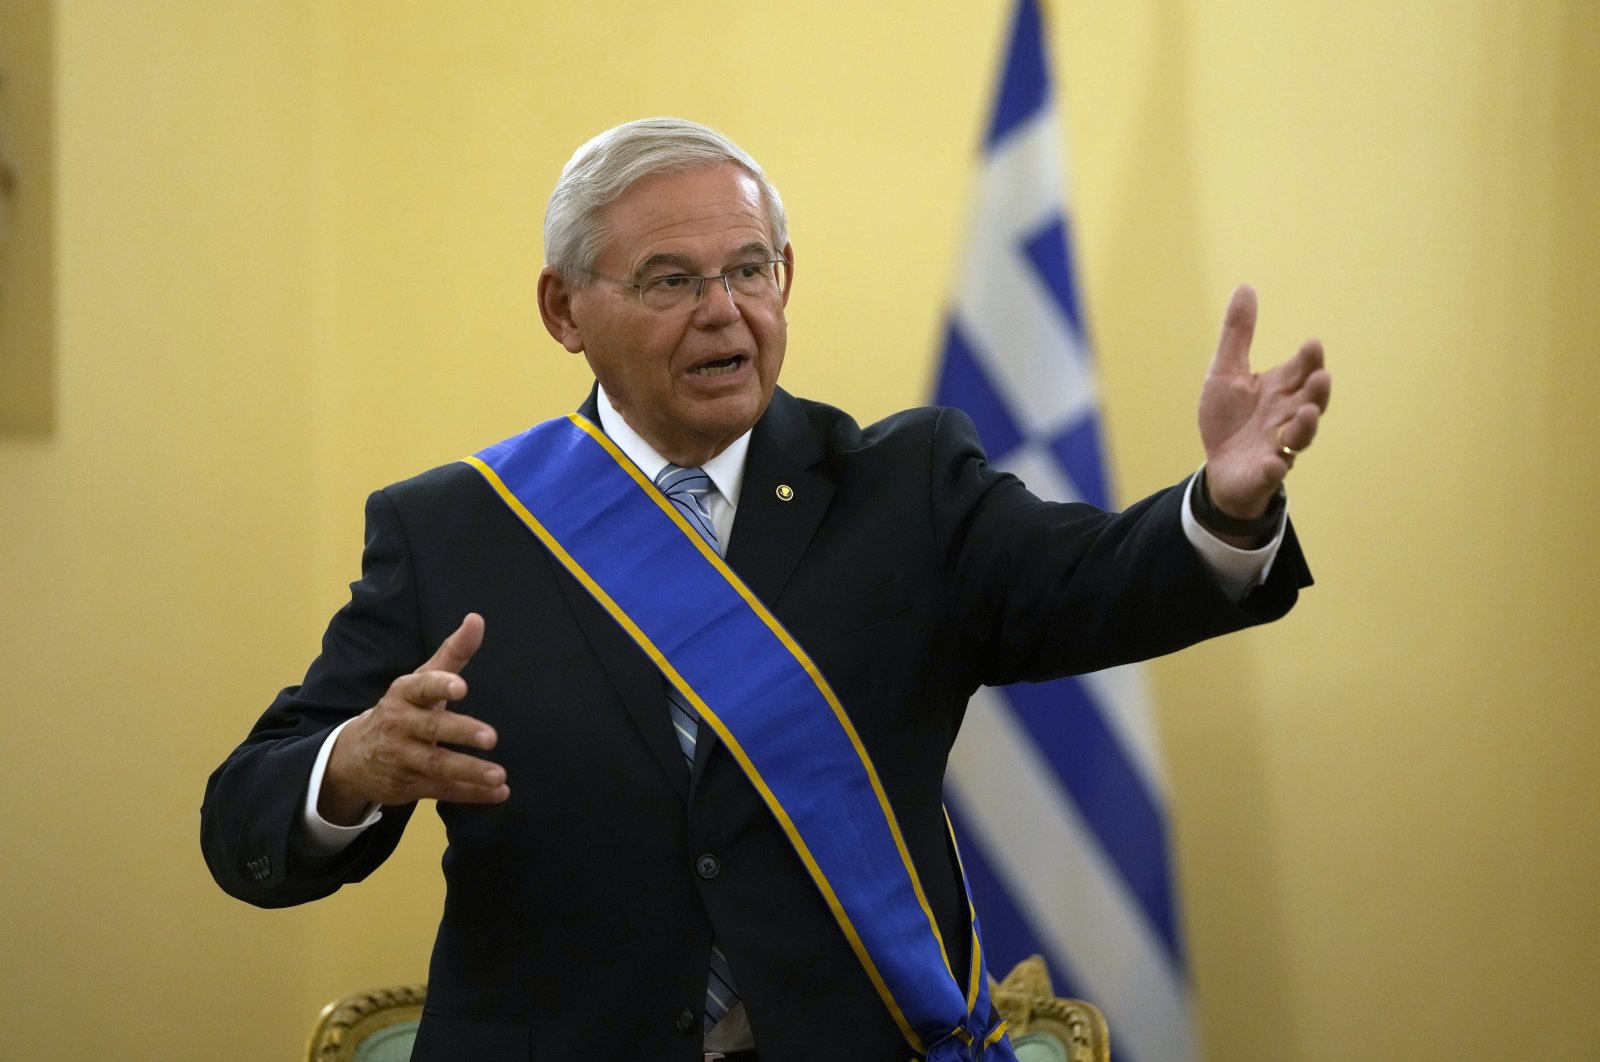 U.S. Senator Bob Menendez, chairperson of the Senate Foreign Relations Committee, speaks after he was awarded the Grand Cross of the Order of the Redeemer by Greek President Katerina Sakellaropoulou at the Presidential Palace in Athens, Aug. 27, 2021. (AP File Photo)